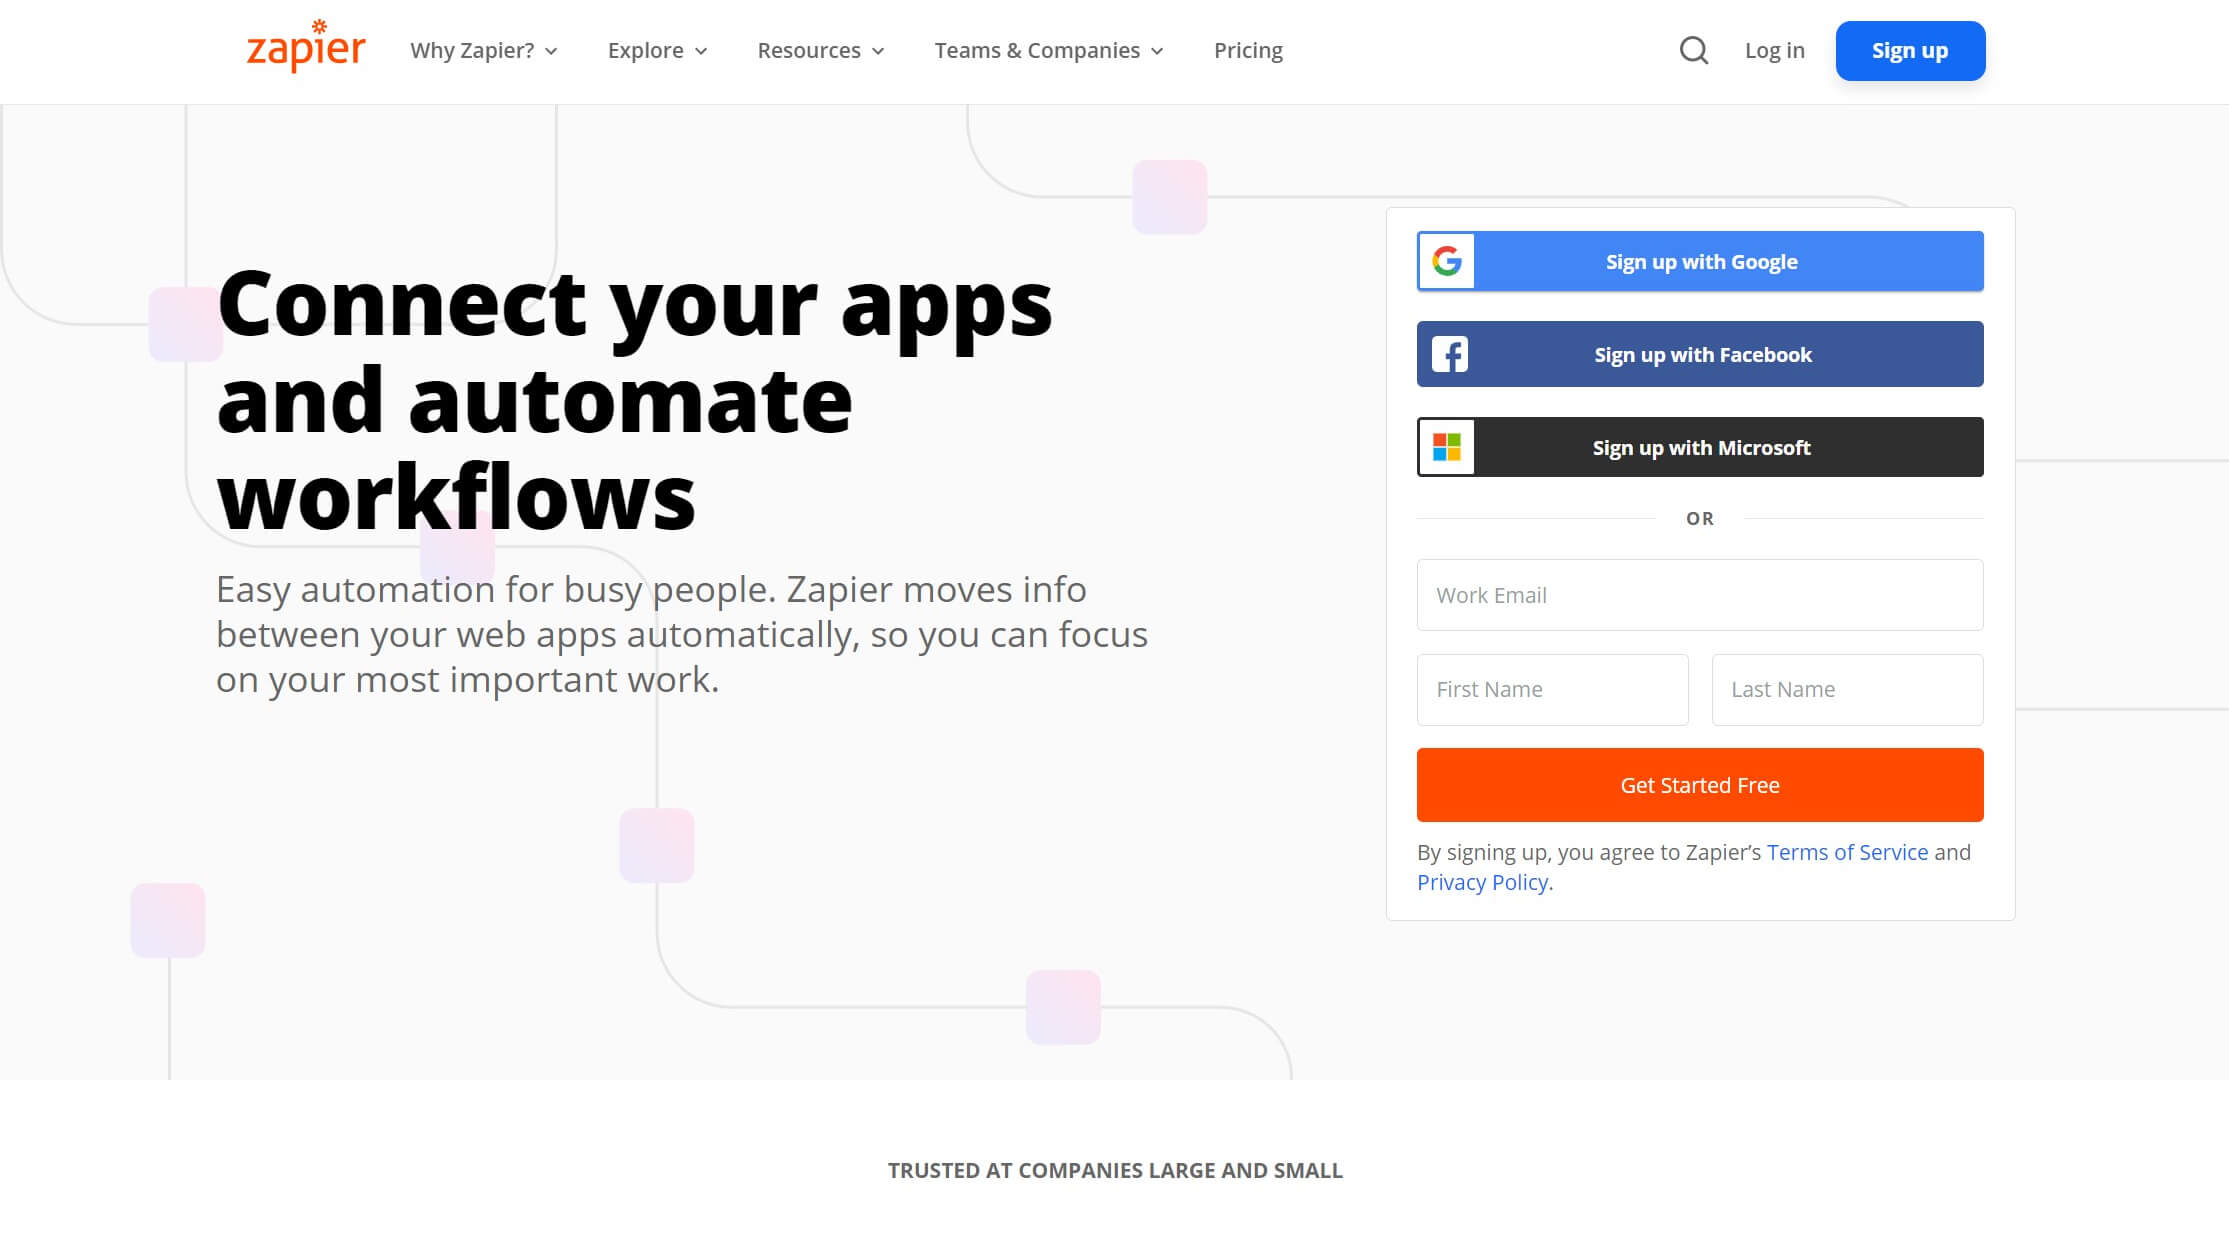 The Zapier service for connecting online apps.